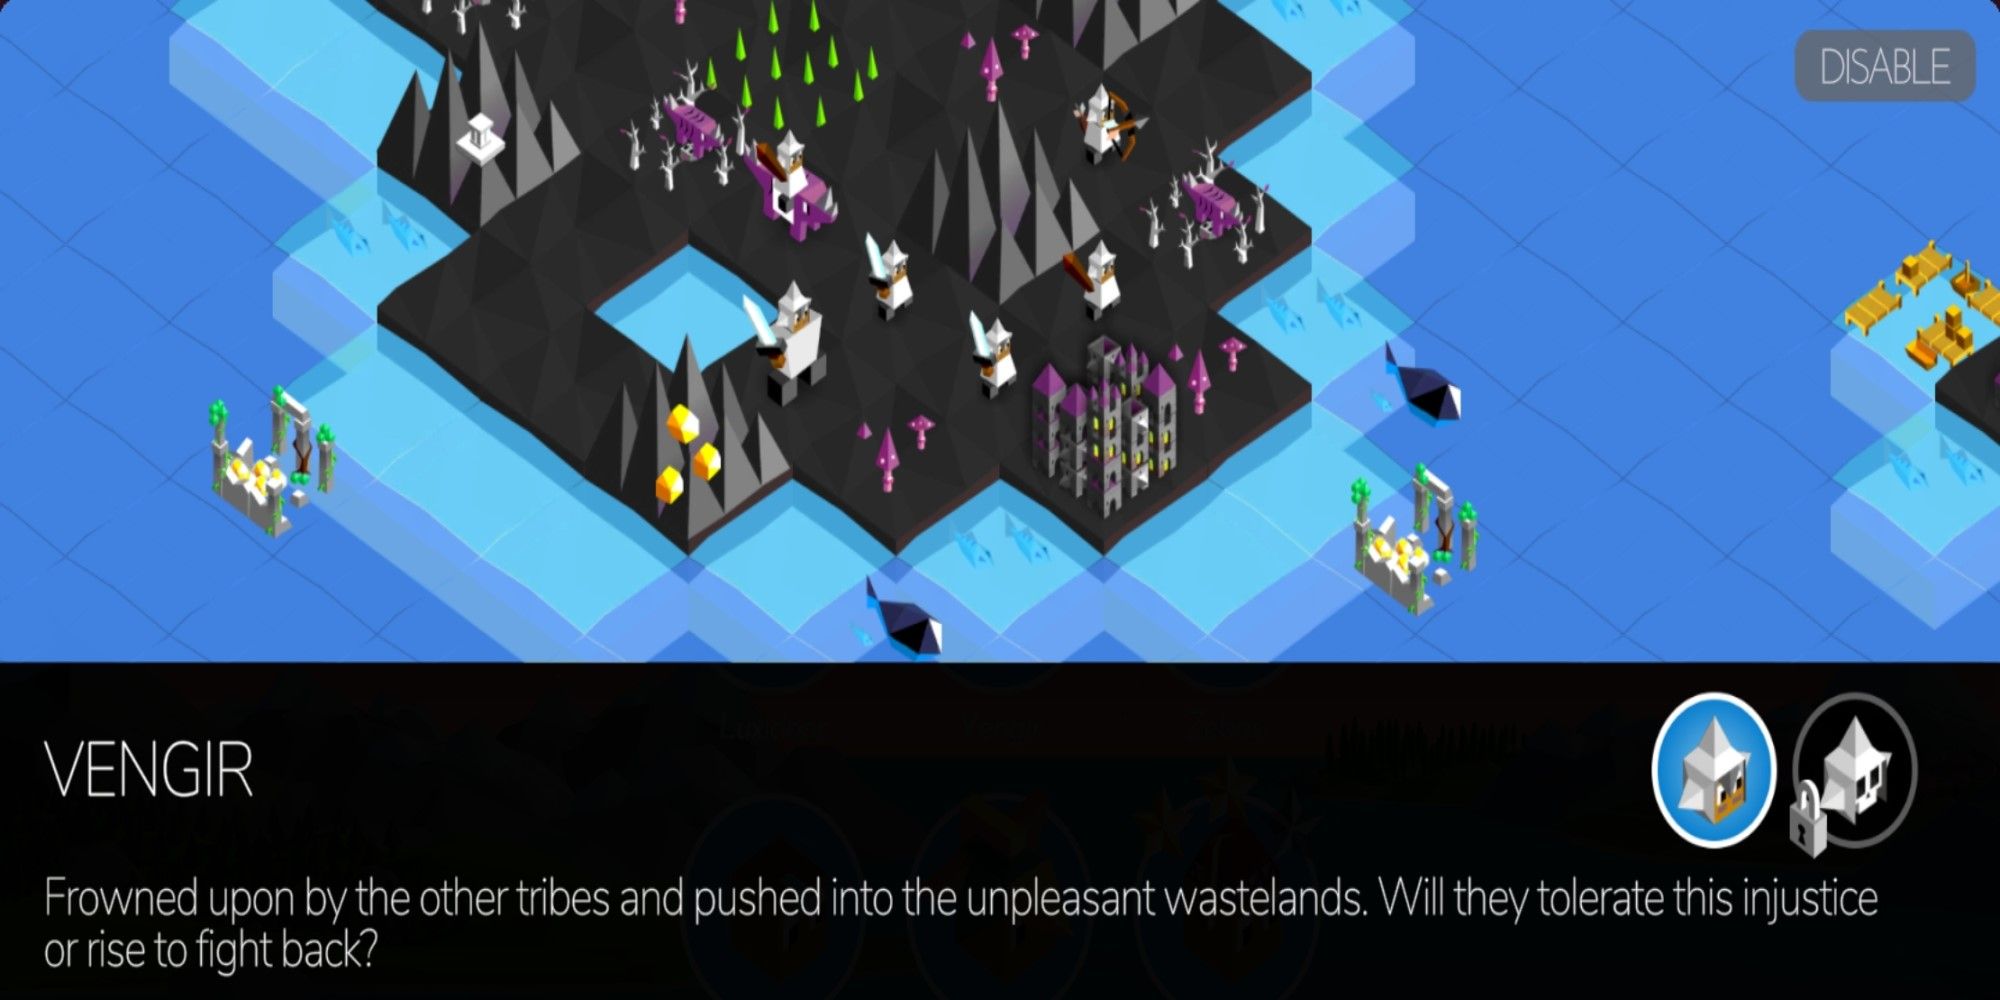 Information on the Vengir Tribe from Battle of Polytopia.